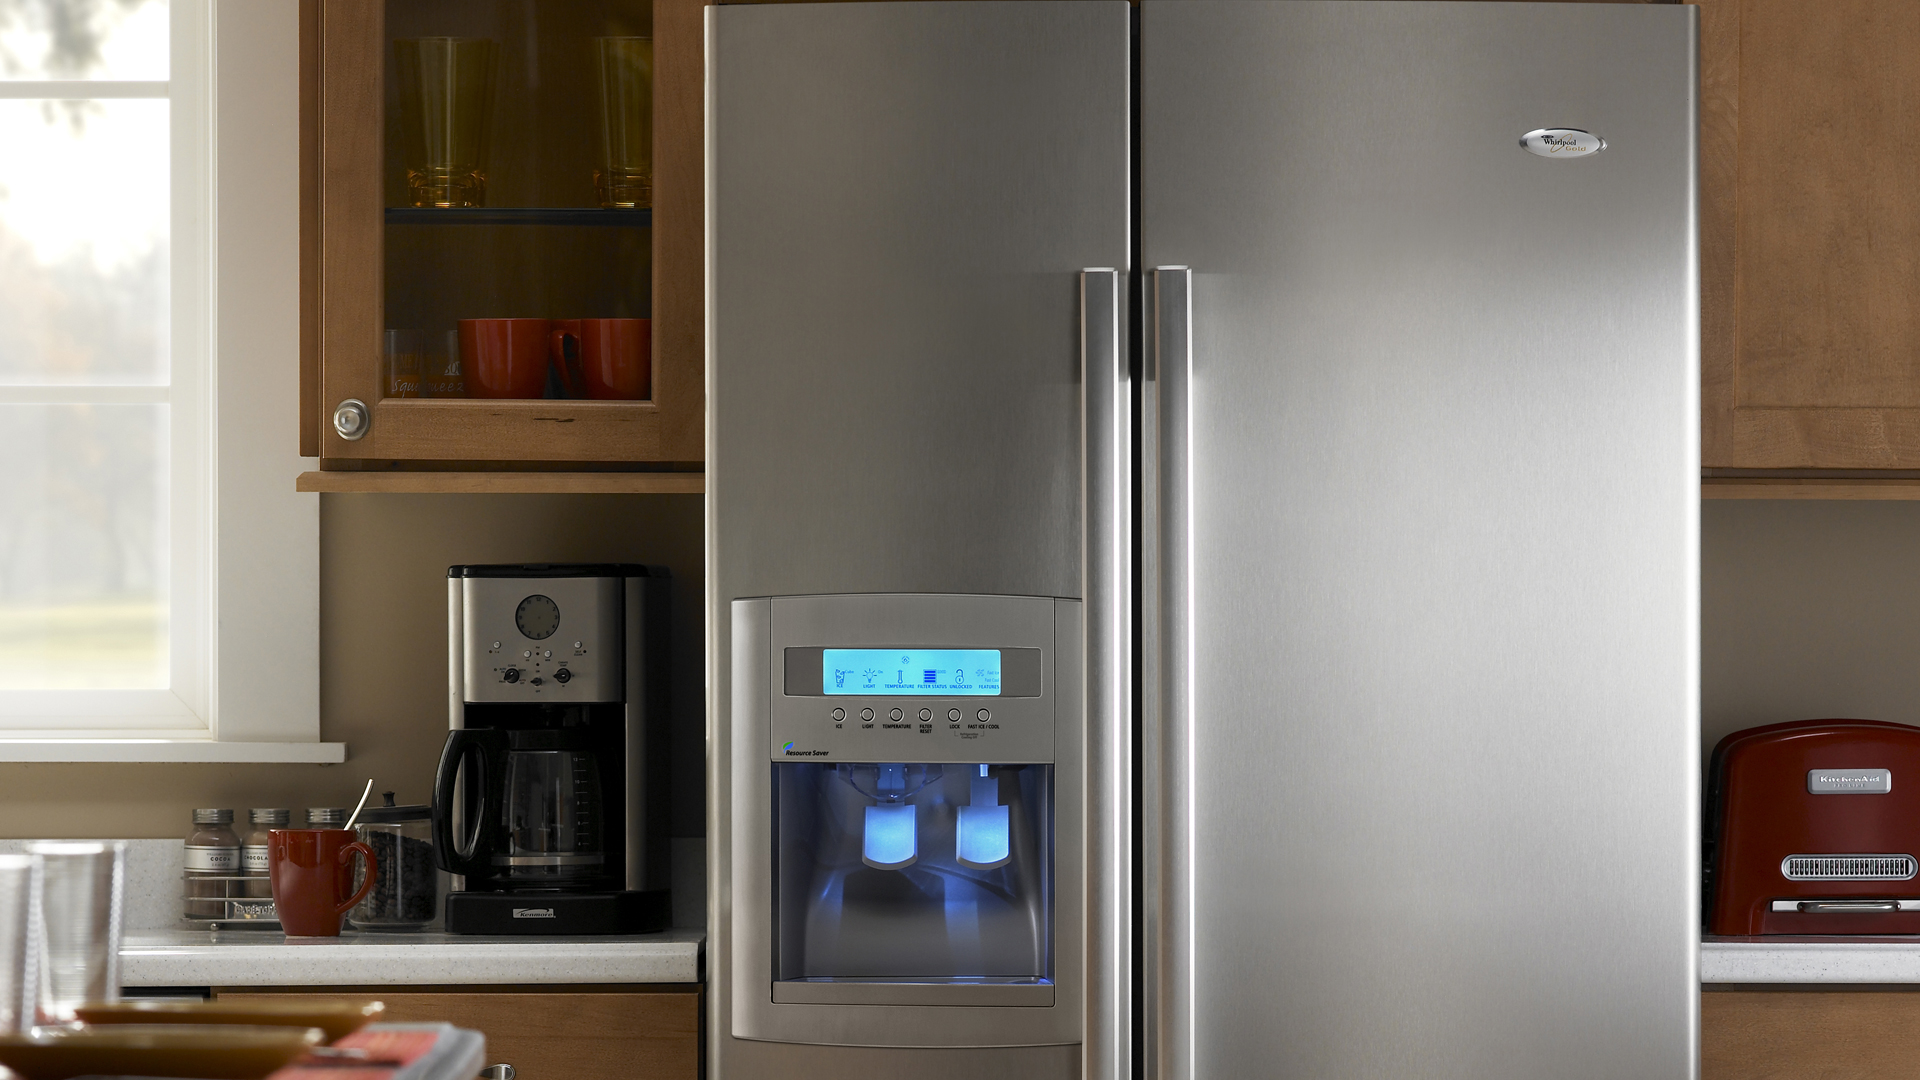 A french door Whirlpool refrigerator with an ice maker